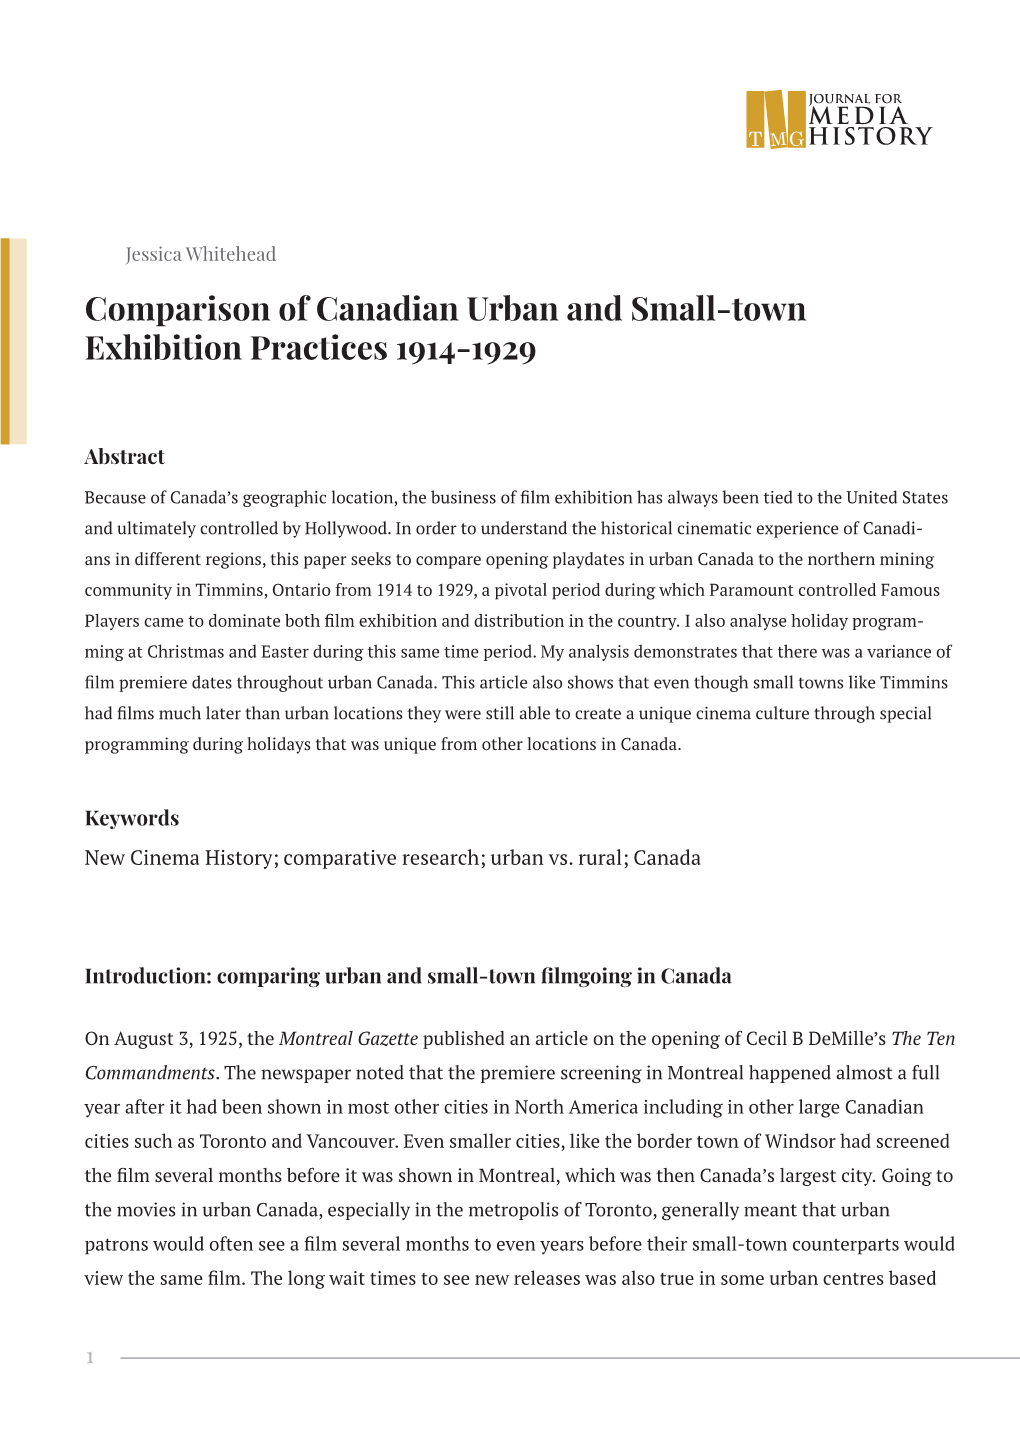 Comparison of Canadian Urban and Small-Town Exhibition Practices 1914-1929